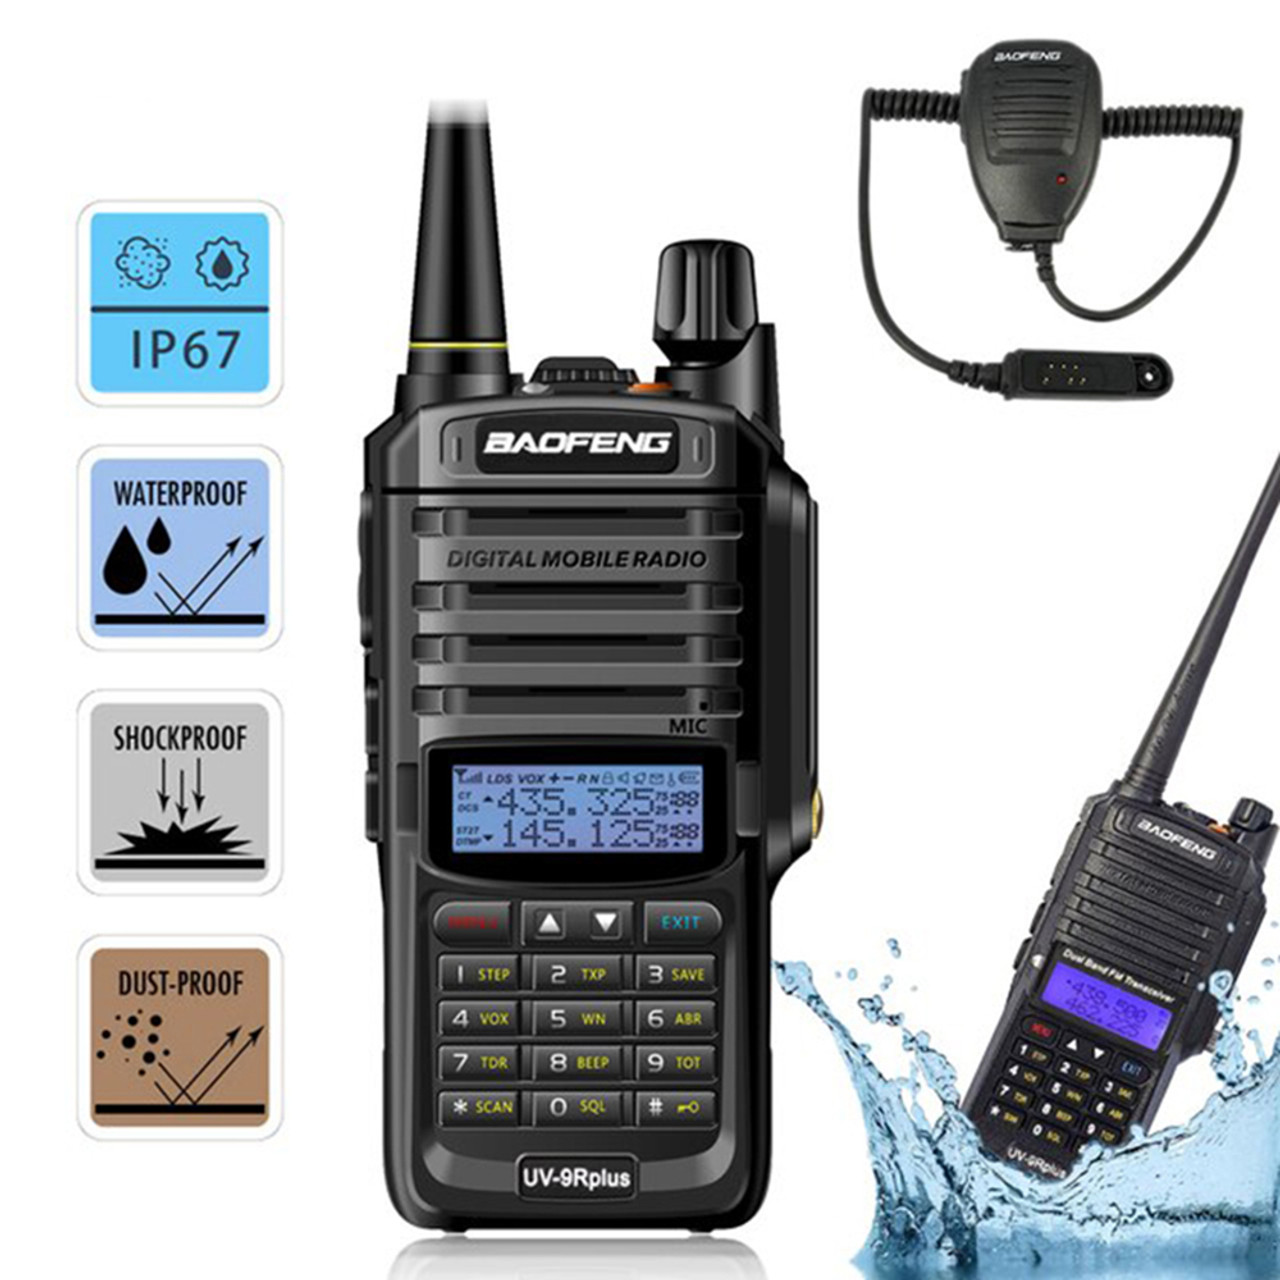 BAOFENG UV-5R 8W Handheld Ham Radio with 3800mAh Rechargeable Battery, Dual-Band 2-Way Radio Complete Set with Earpiece and Programming Cable (1 Pack) - 1